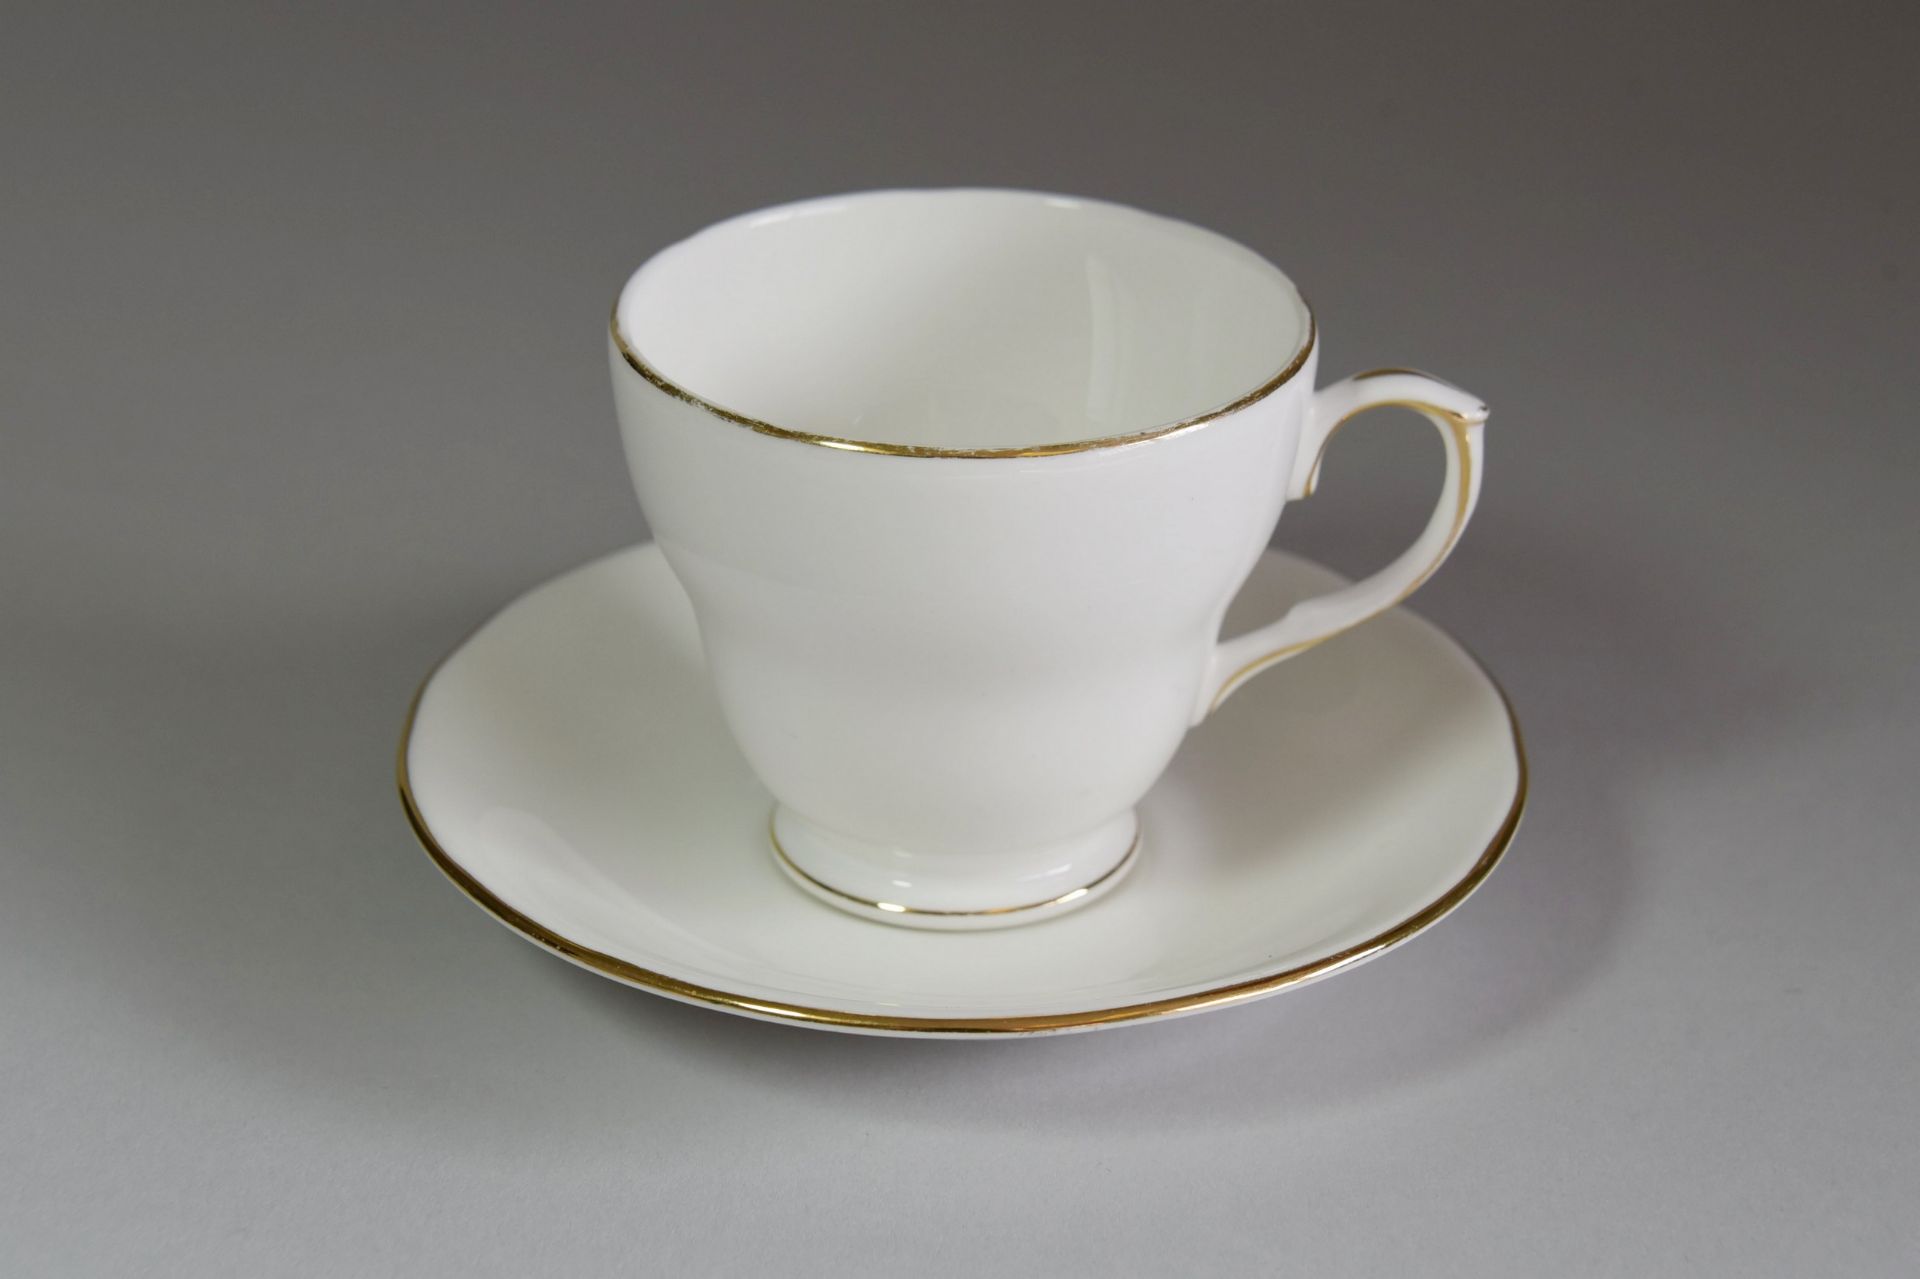 Approx. 2,564 items of Duchess English Fine Bone China and vintage crockery - Image 6 of 20